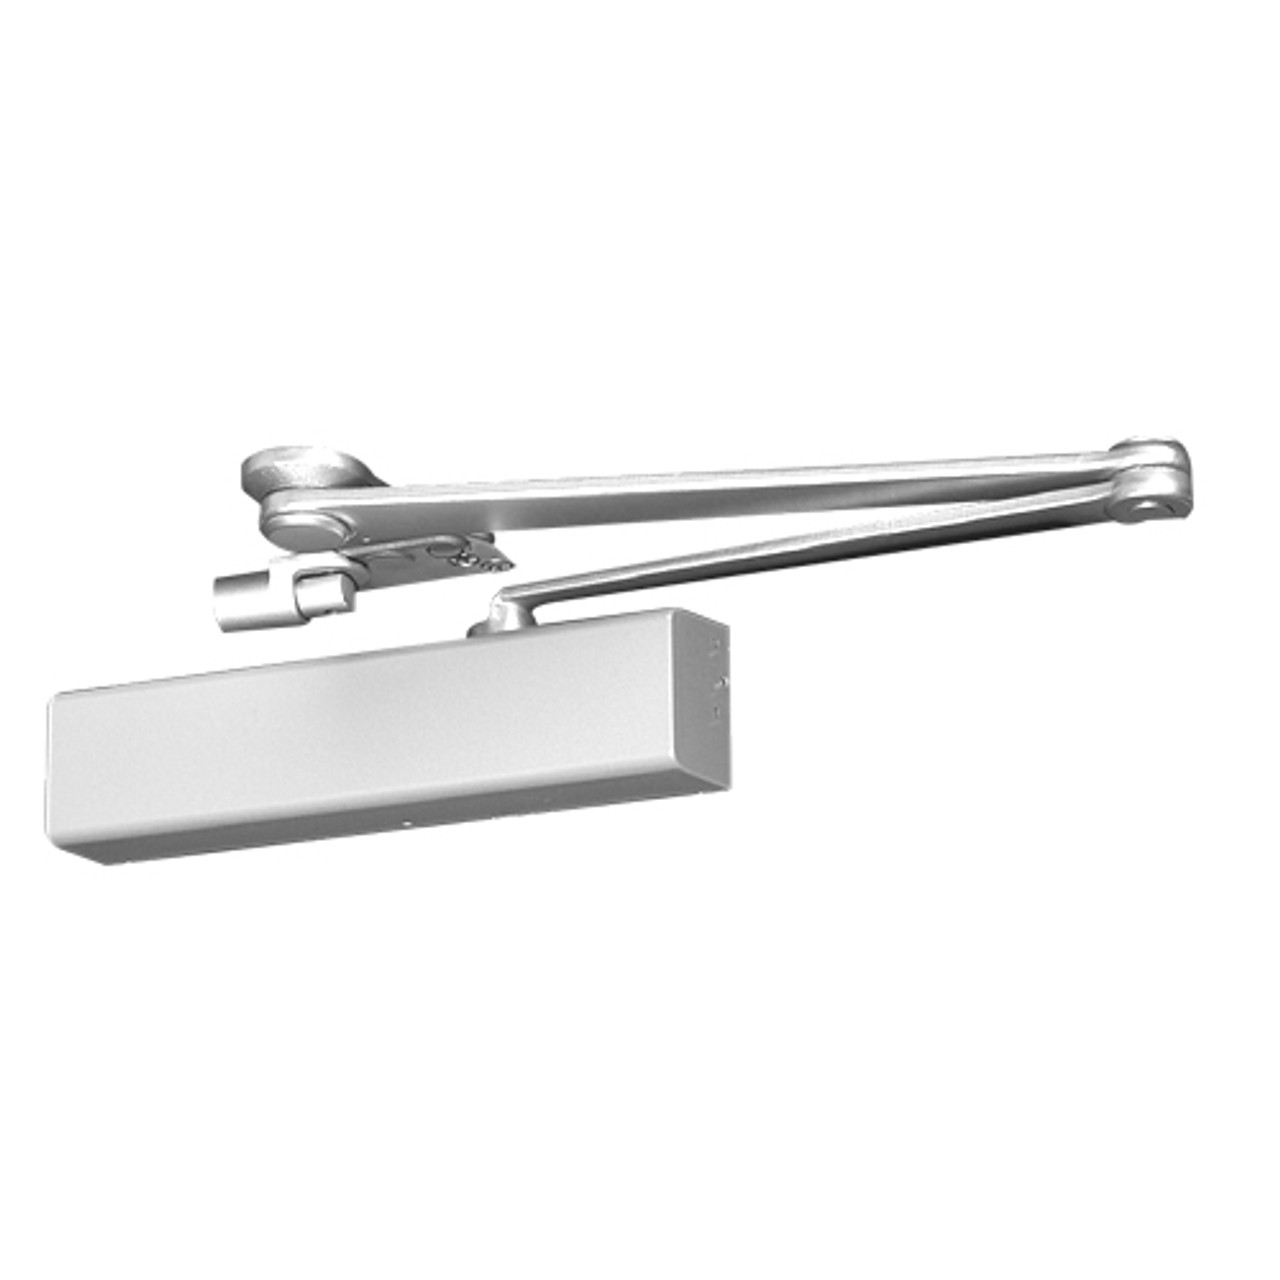 CPS8501M-689 Norton 8000 Series Full Cover Non-Hold Open Door Closers with CloserPlus Spring Arm in Aluminum Finish